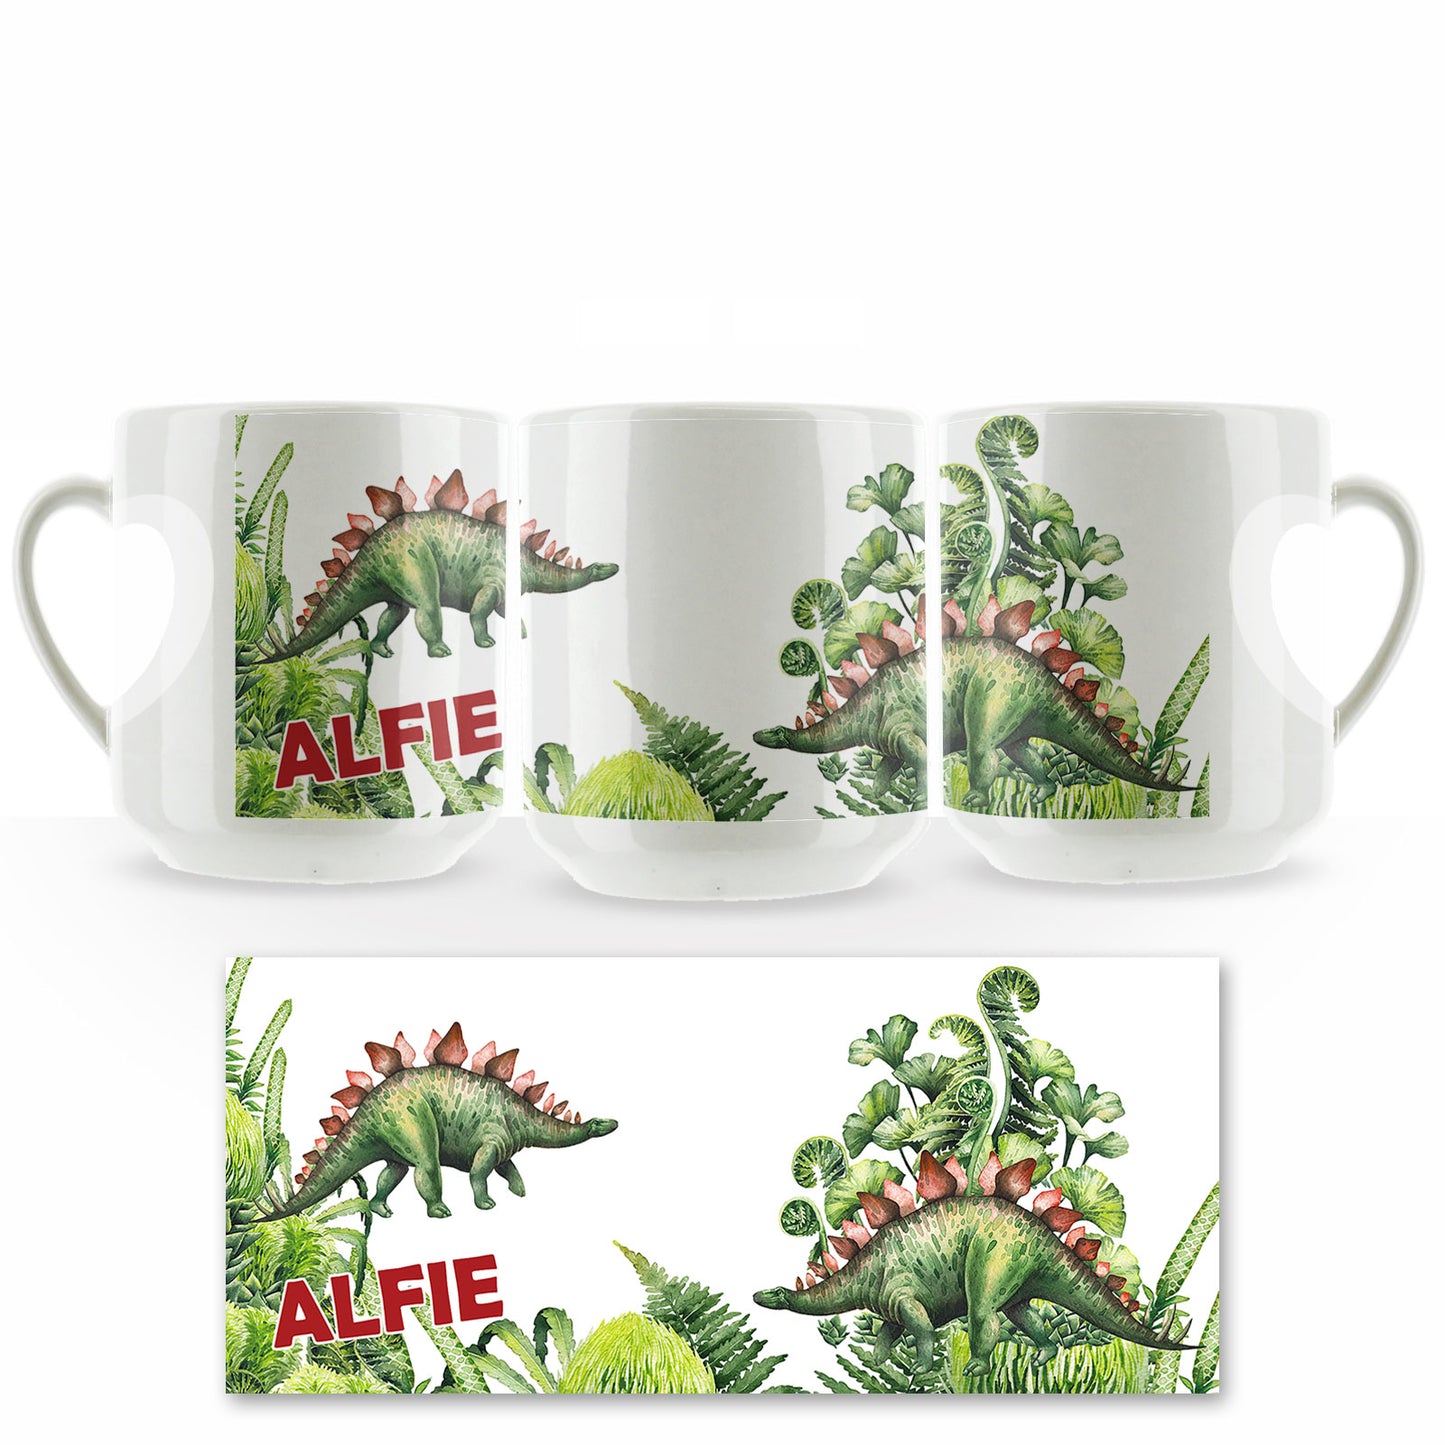 Personalised Mug with Red Bold Text and Parasaurolophus